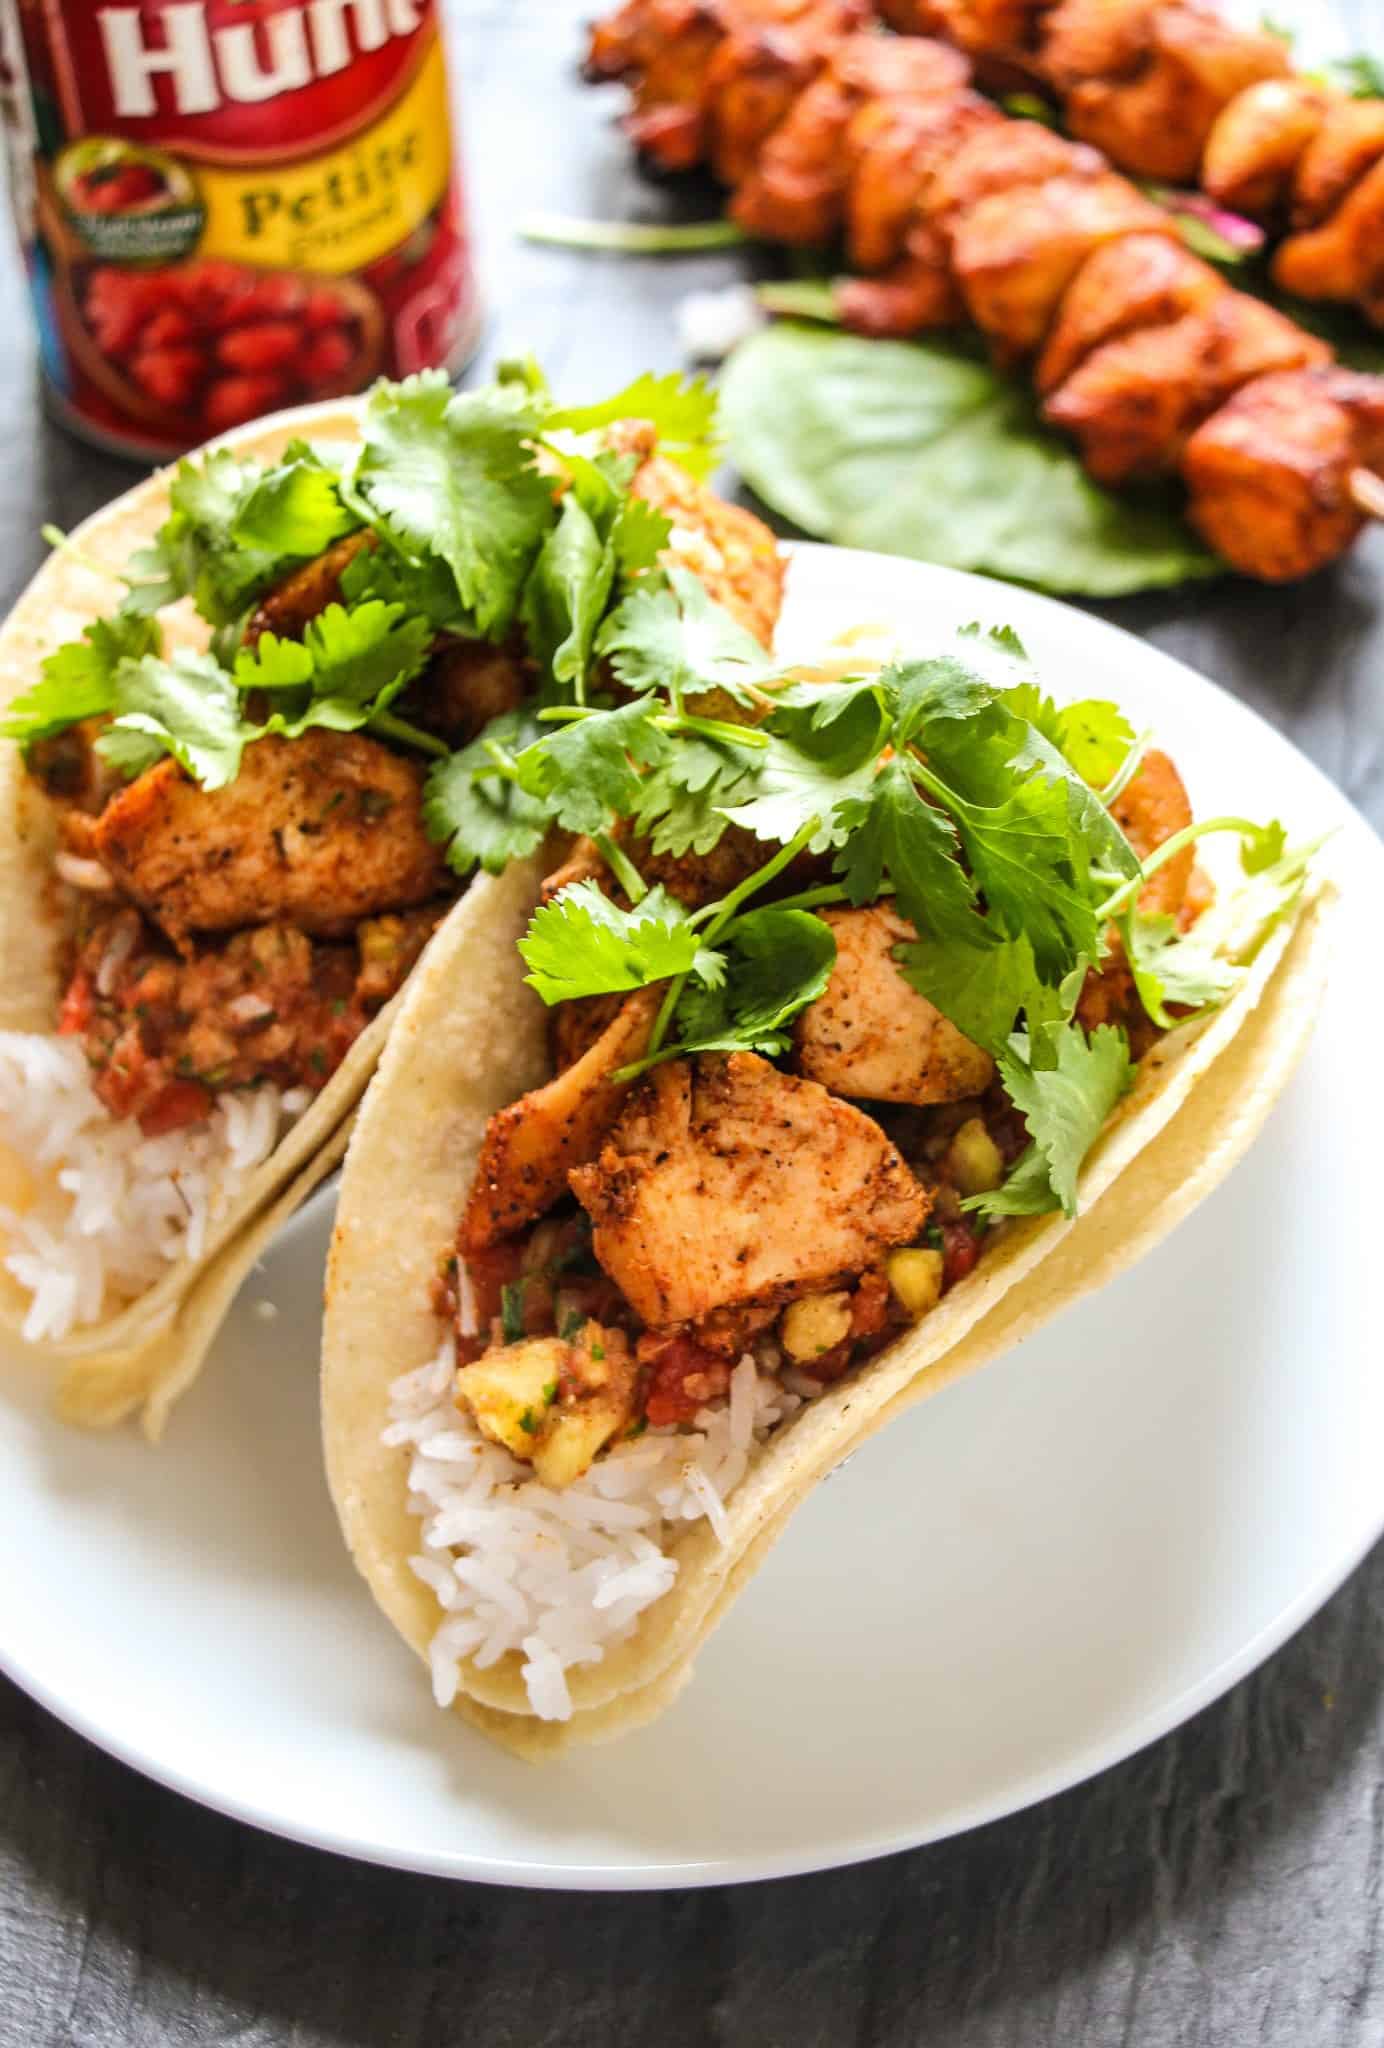 30-Minute Cajun Chicken Tacos with Sweet & Spicy Tomato Salsa - Layers